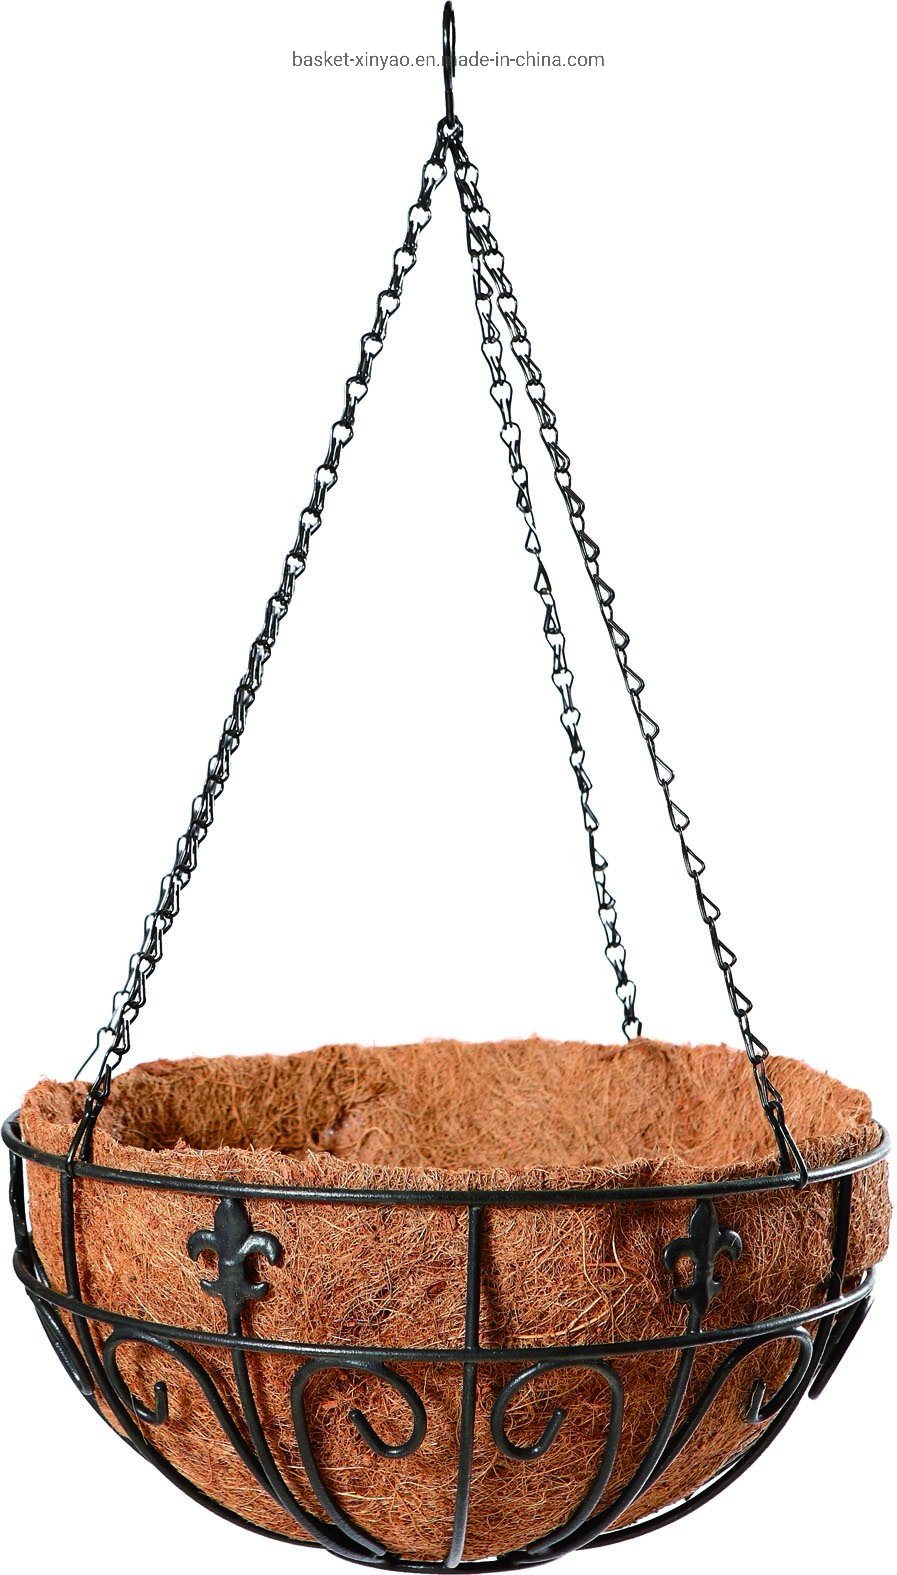 Imperial Garden Metal Hanging Basket with Chains and Coco Liner (XY6030250)